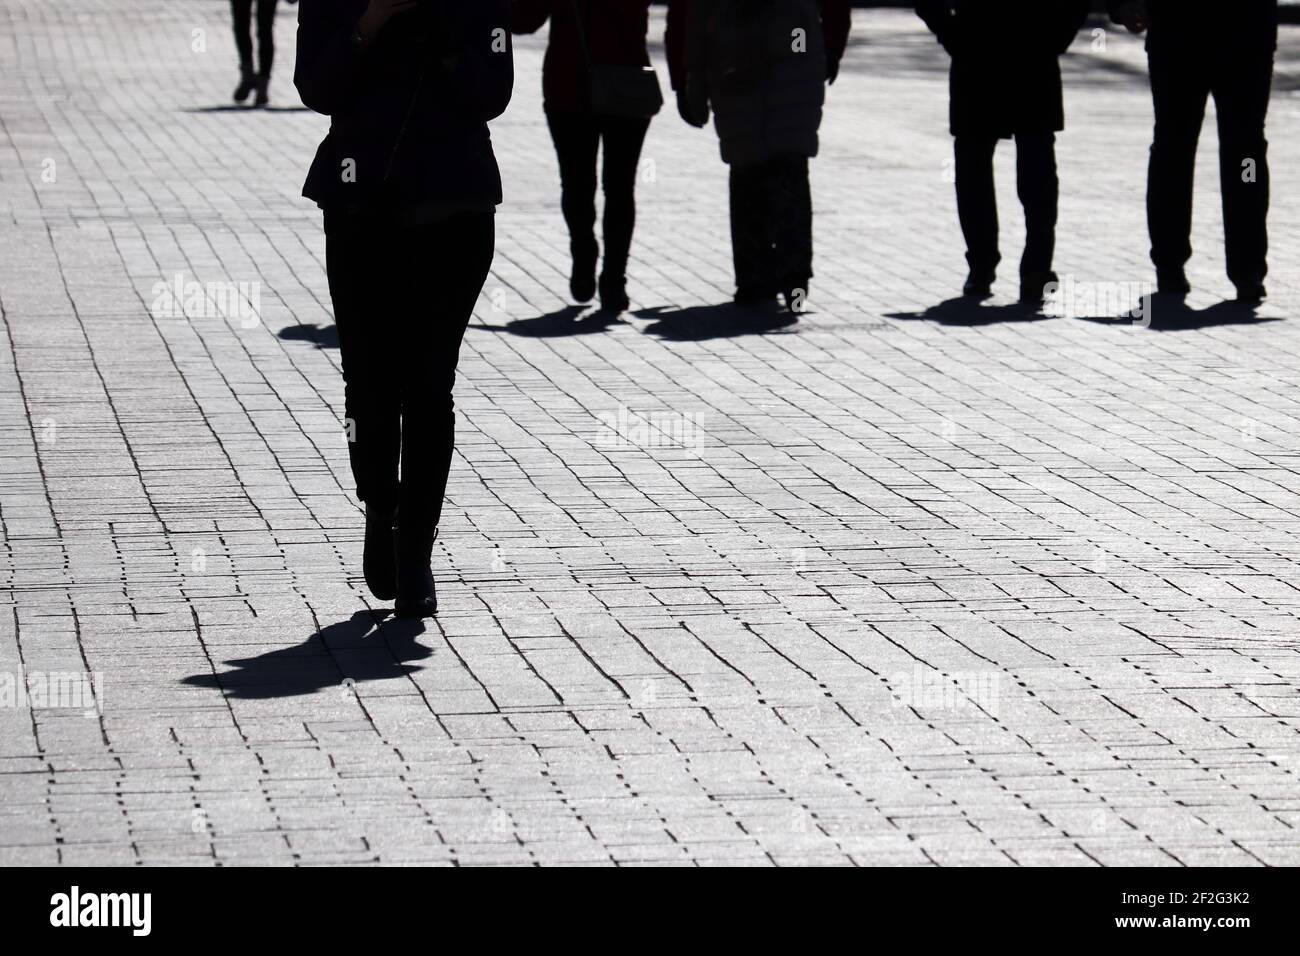 Silhouettes and shadows of people walking on the city street. Concept of society or population Stock Photo